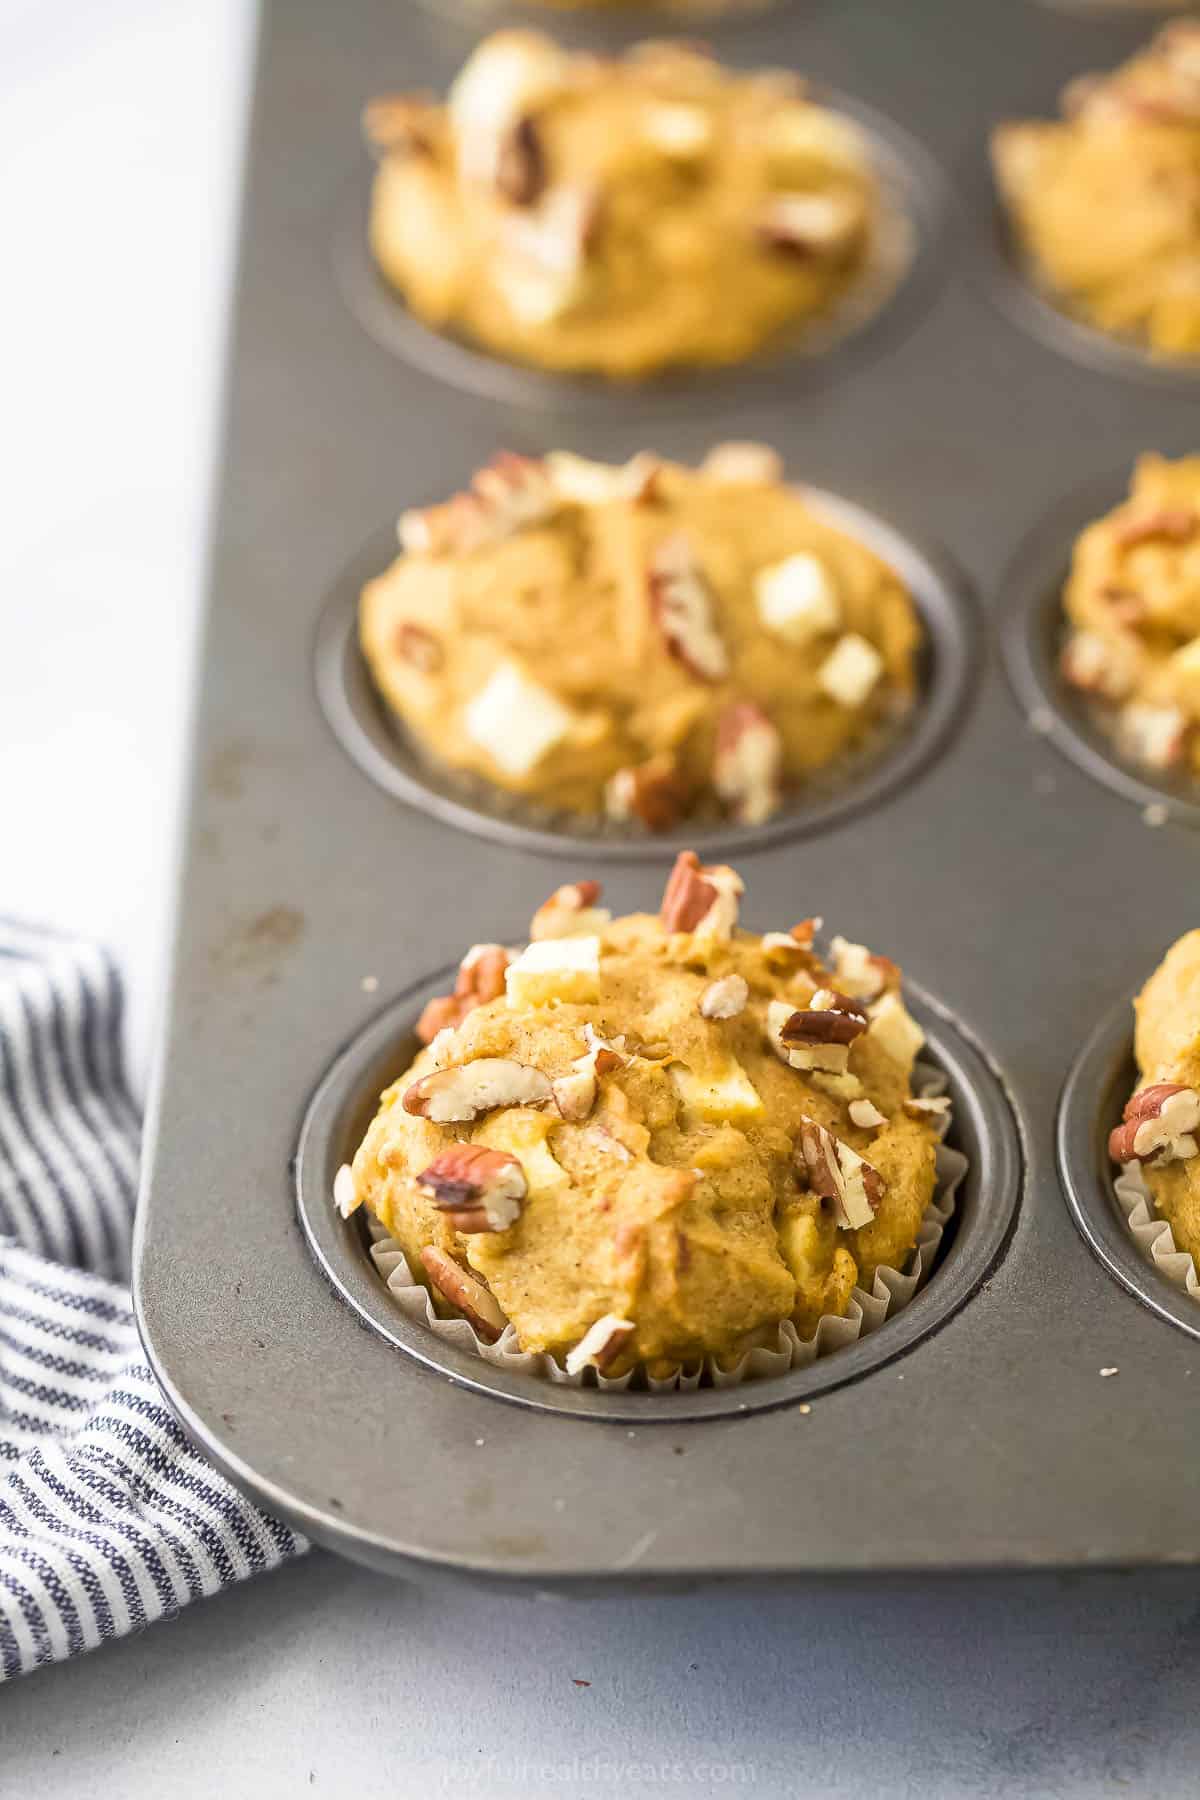 Three homemade muffins inside a muffin tin next to a striped kitchen towel